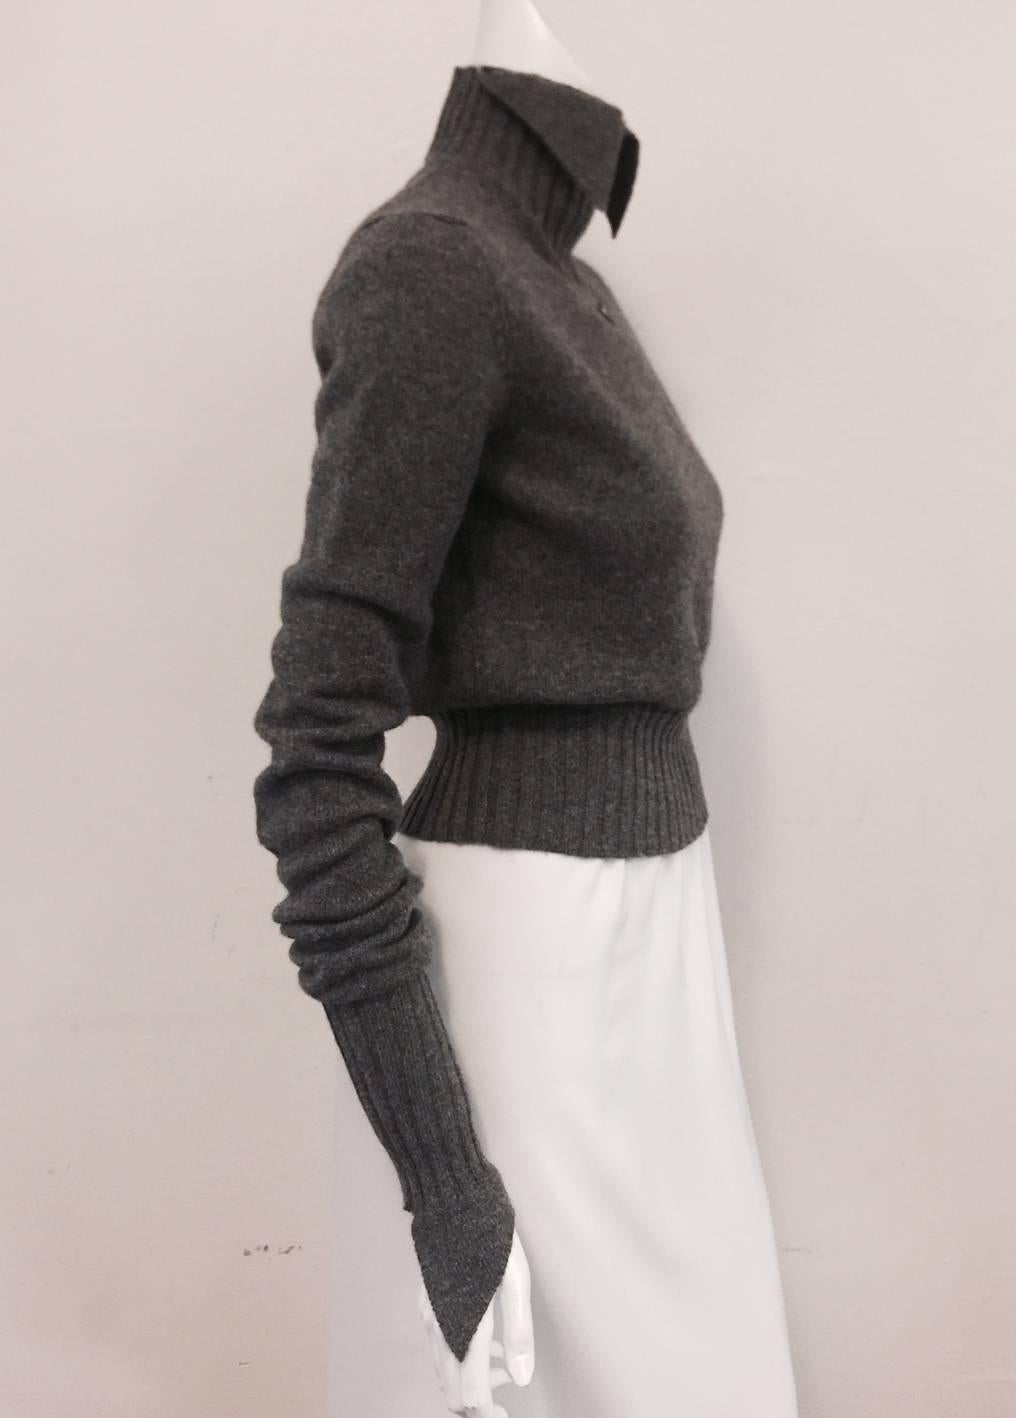 Chic to a fault, this Chanel Heather Grey Mock Turtleneck is a must for any lover of Lagerfeld's designs!  Features luxurious cashmere and wide banding at neck, waist and cuffs.  The "Wow Factor"?  Mock turtleneck features winged collar